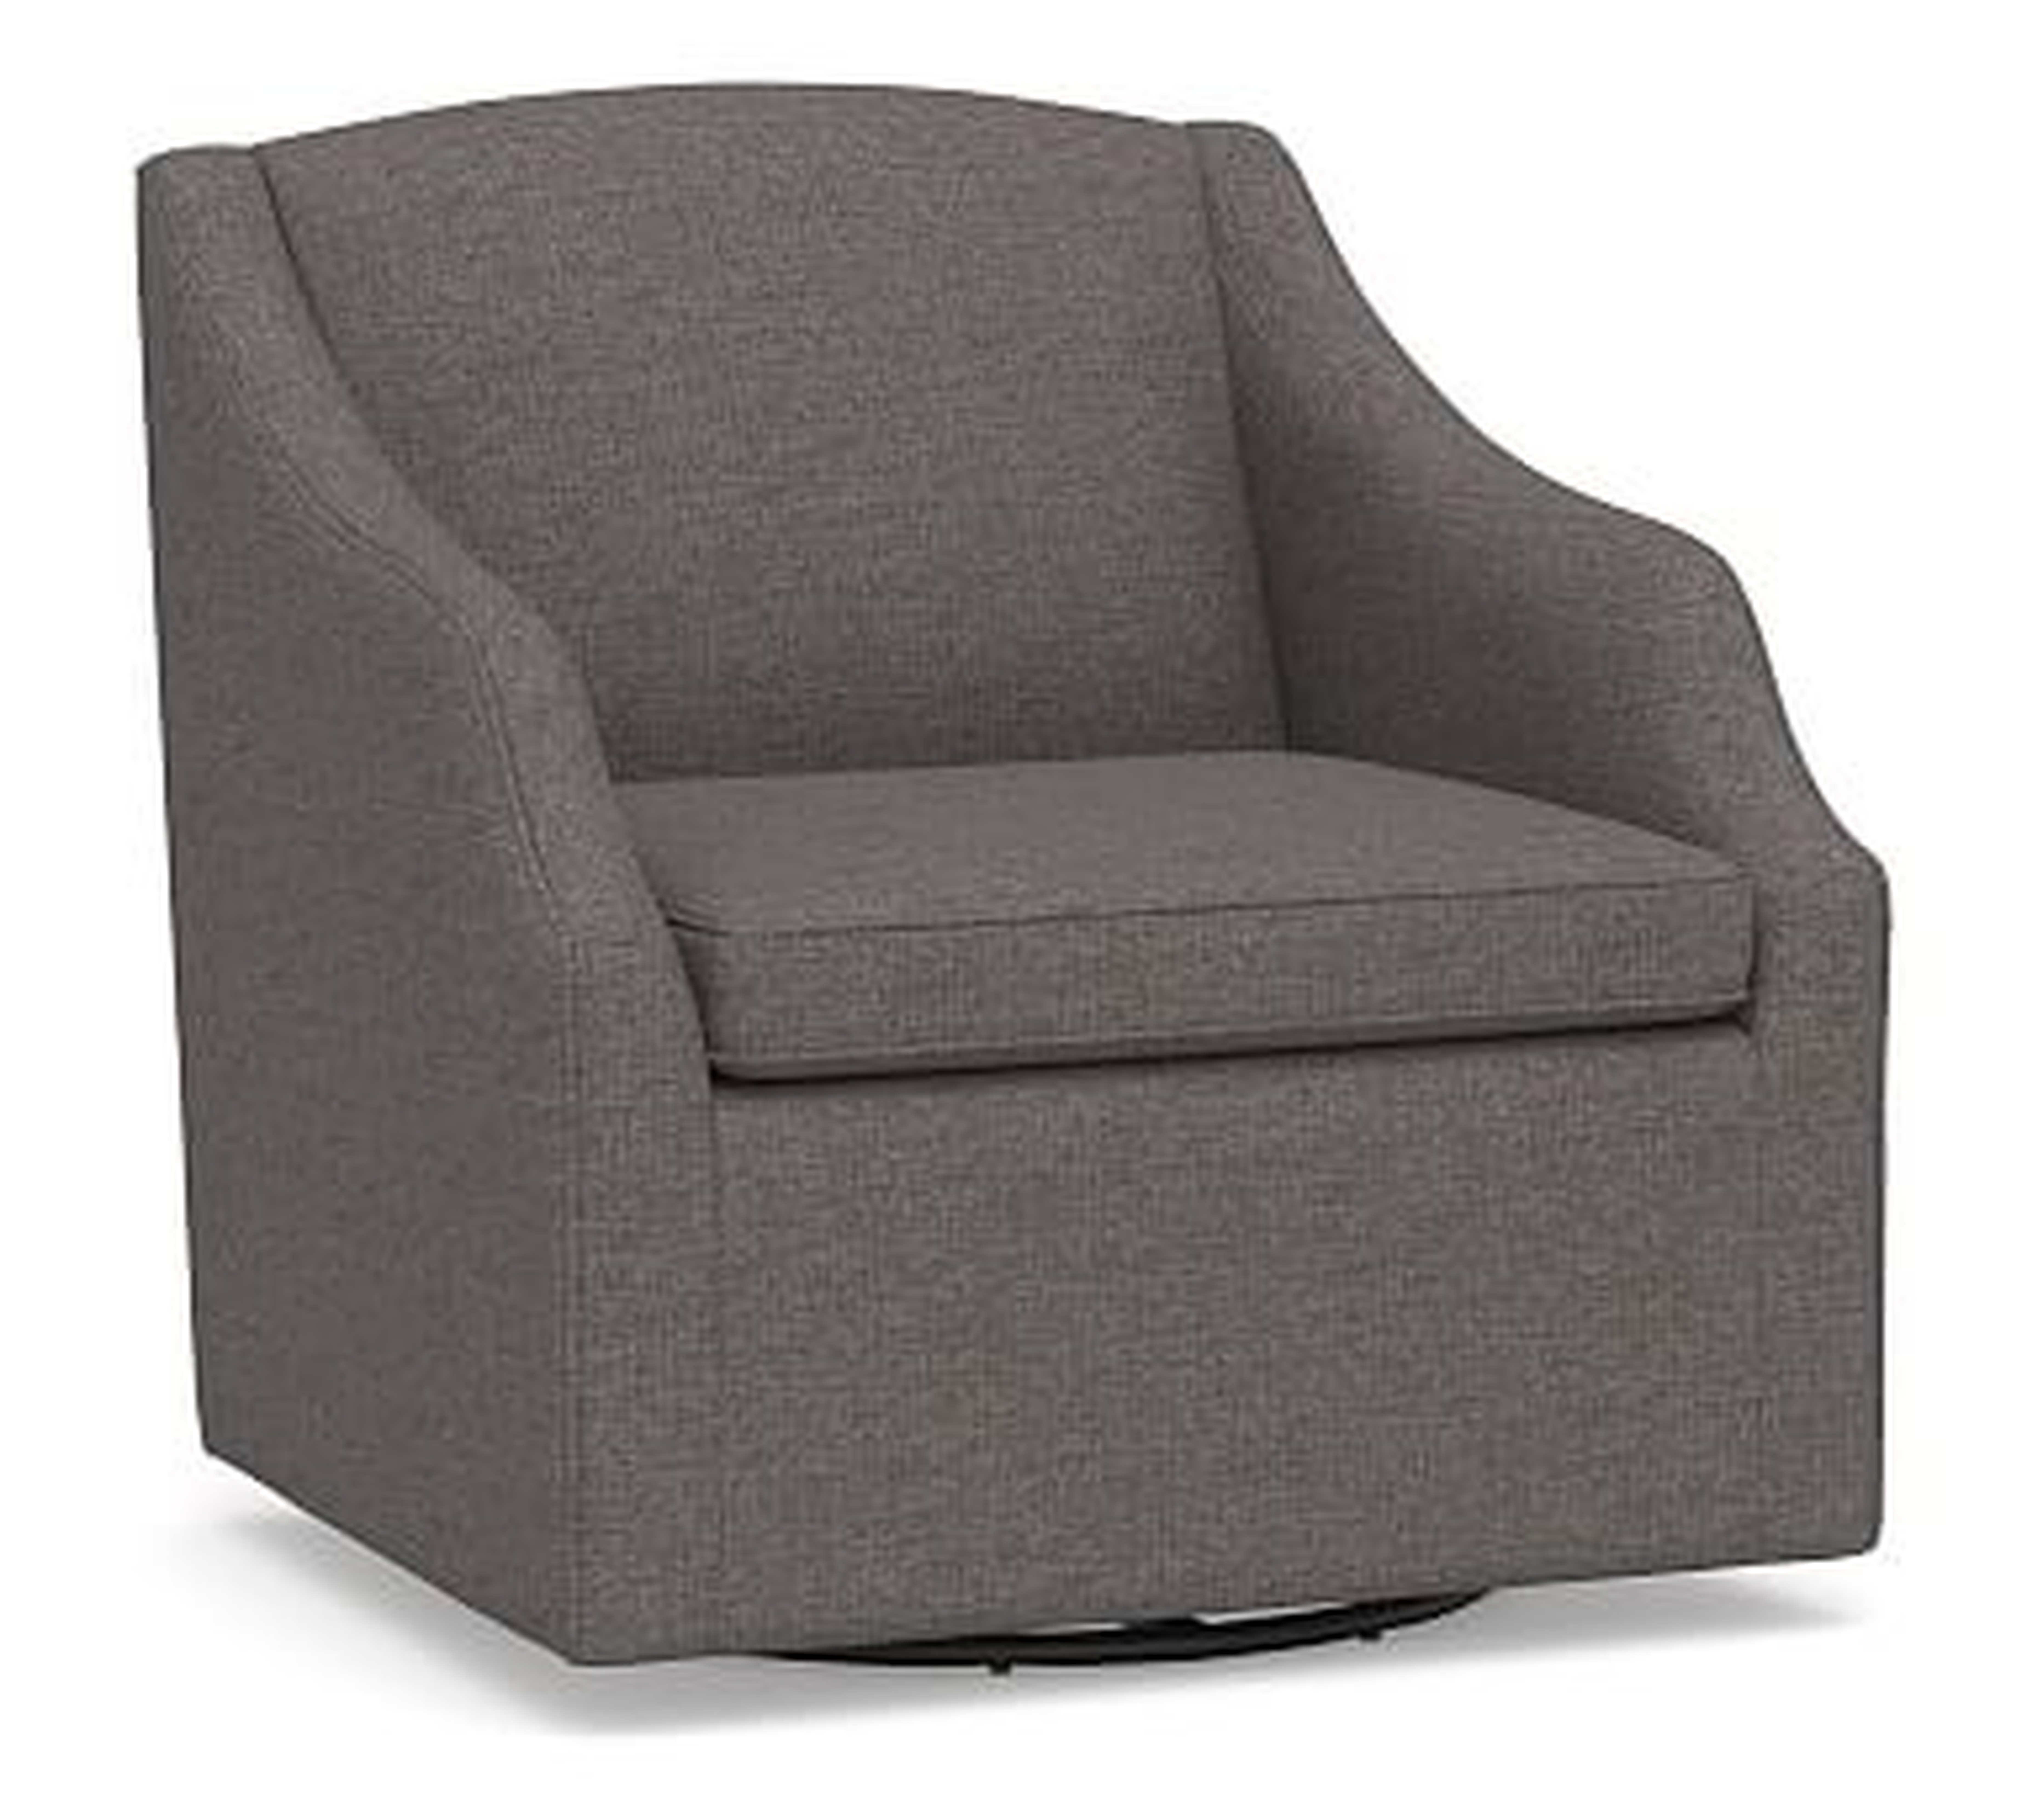 SoMa Emma Upholstered Swivel Armchair, Polyester Wrapped Cushions, Brushed Crossweave Charcoal - Pottery Barn